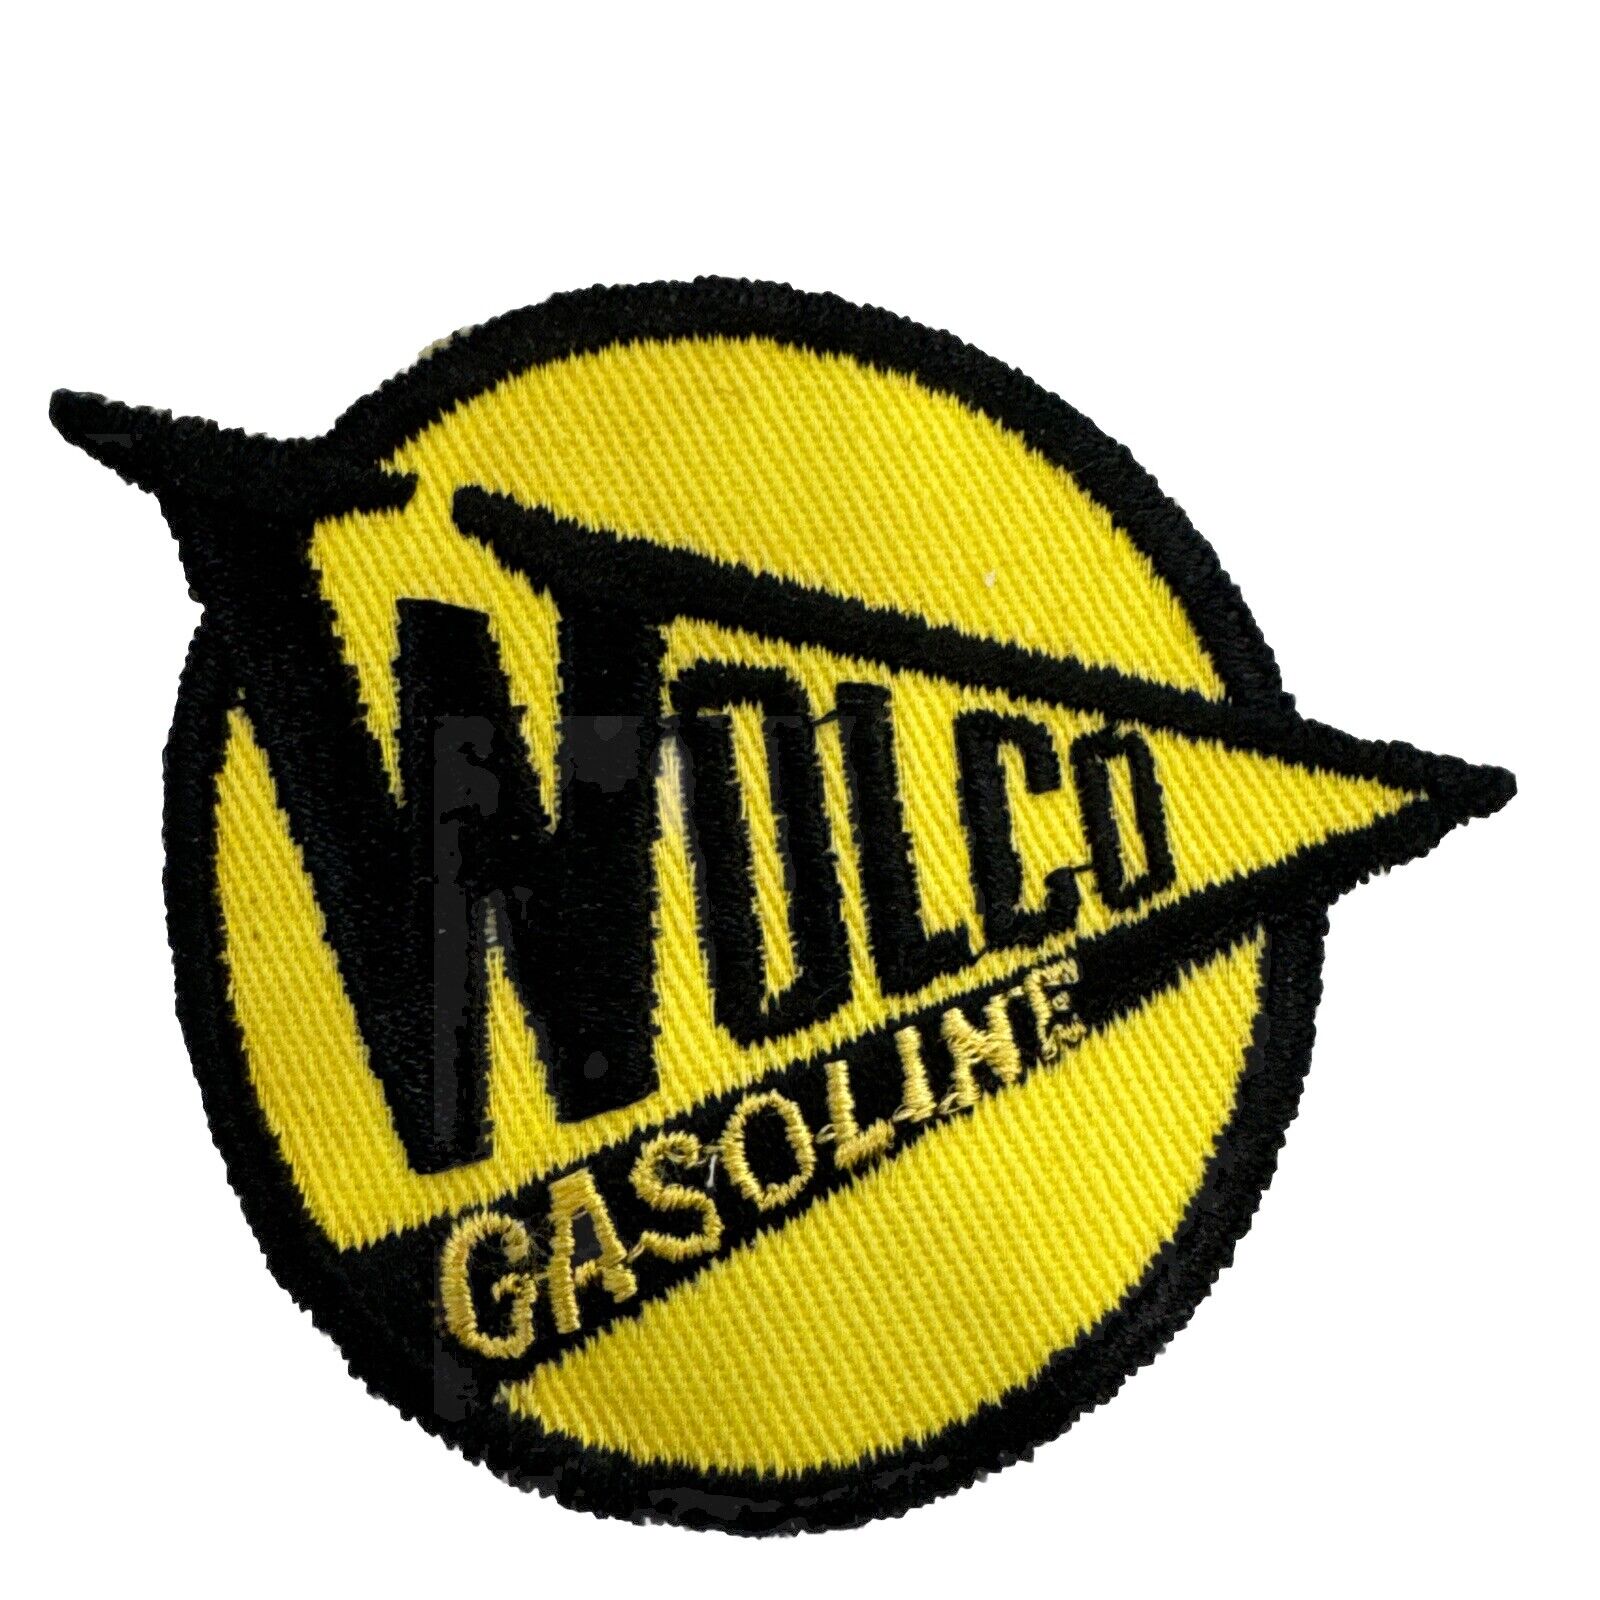 Vintage c. 70s-80s Wolco Gasoline Uniform Embroided Patch Approx 3” NOS